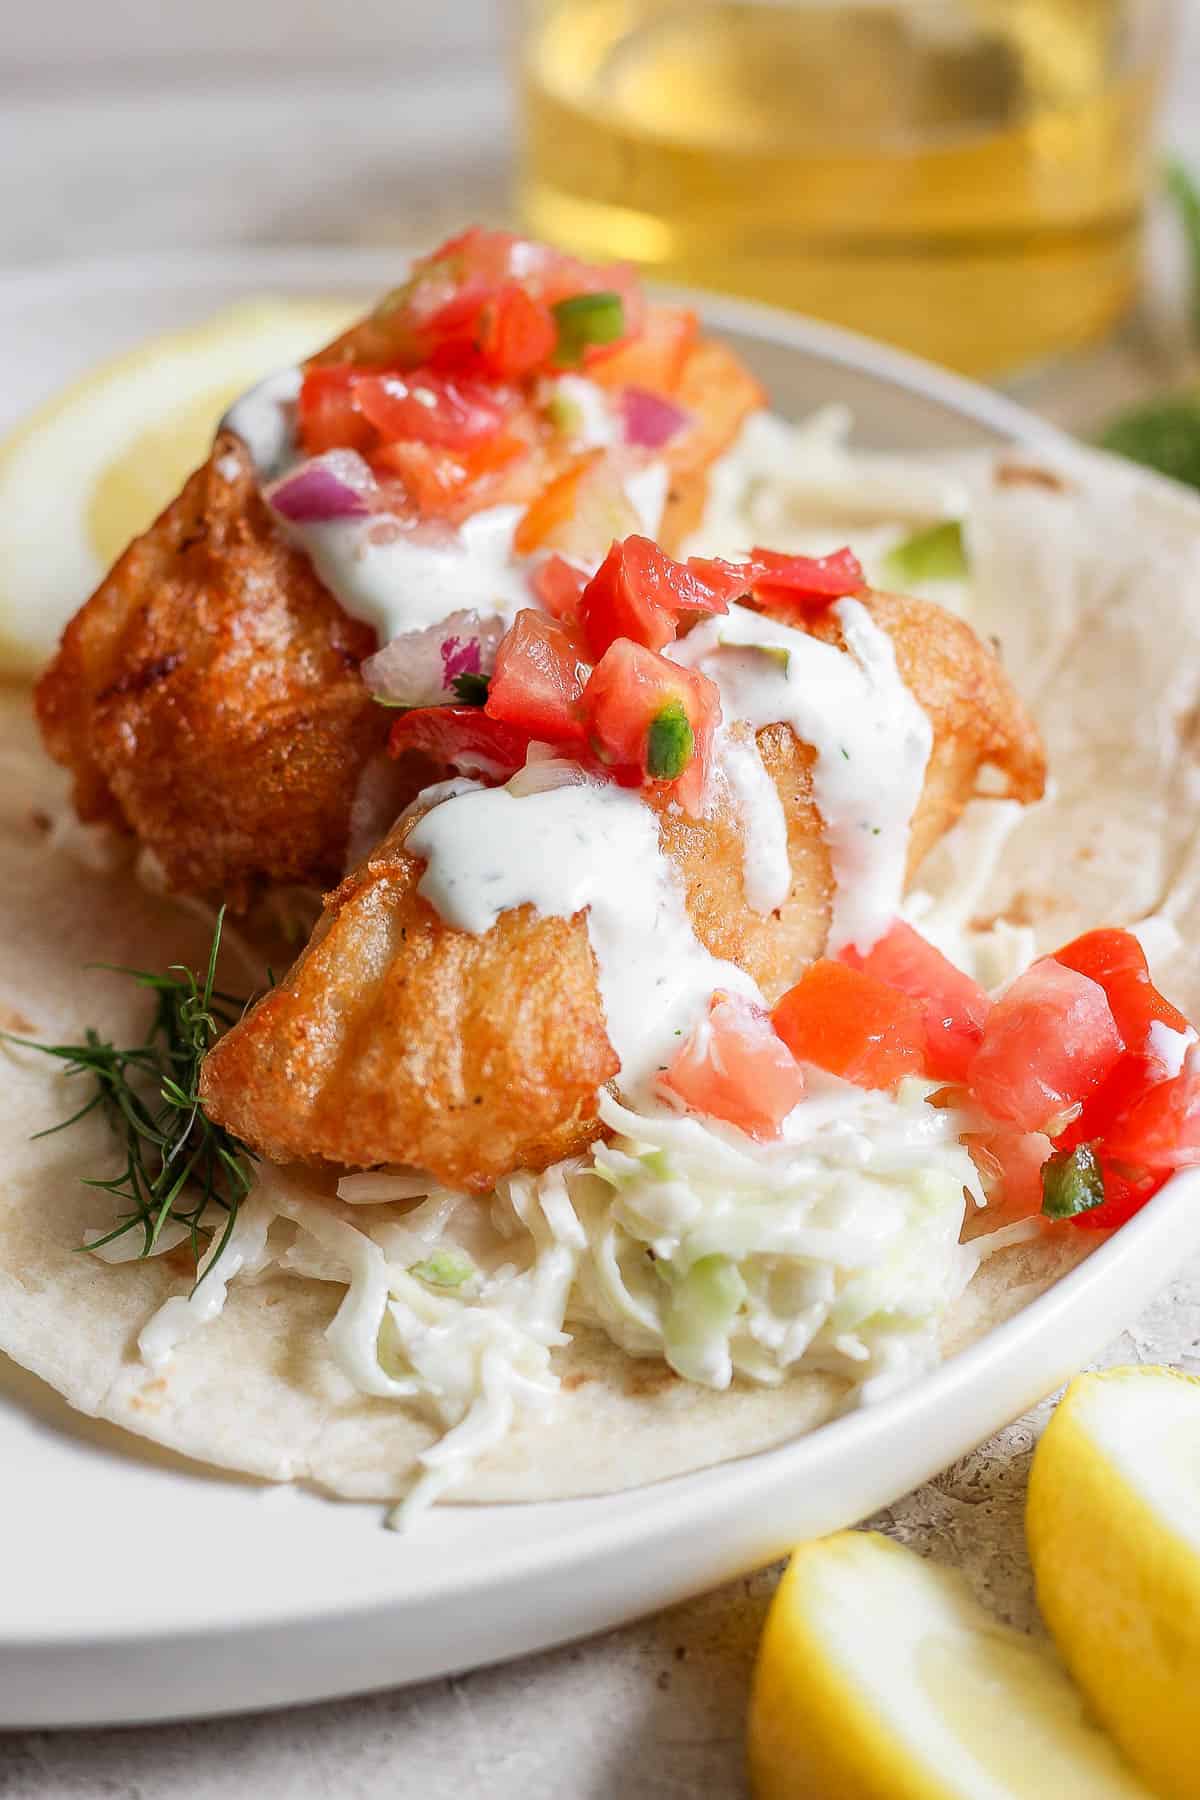 A fully assembled fish taco on a plate.